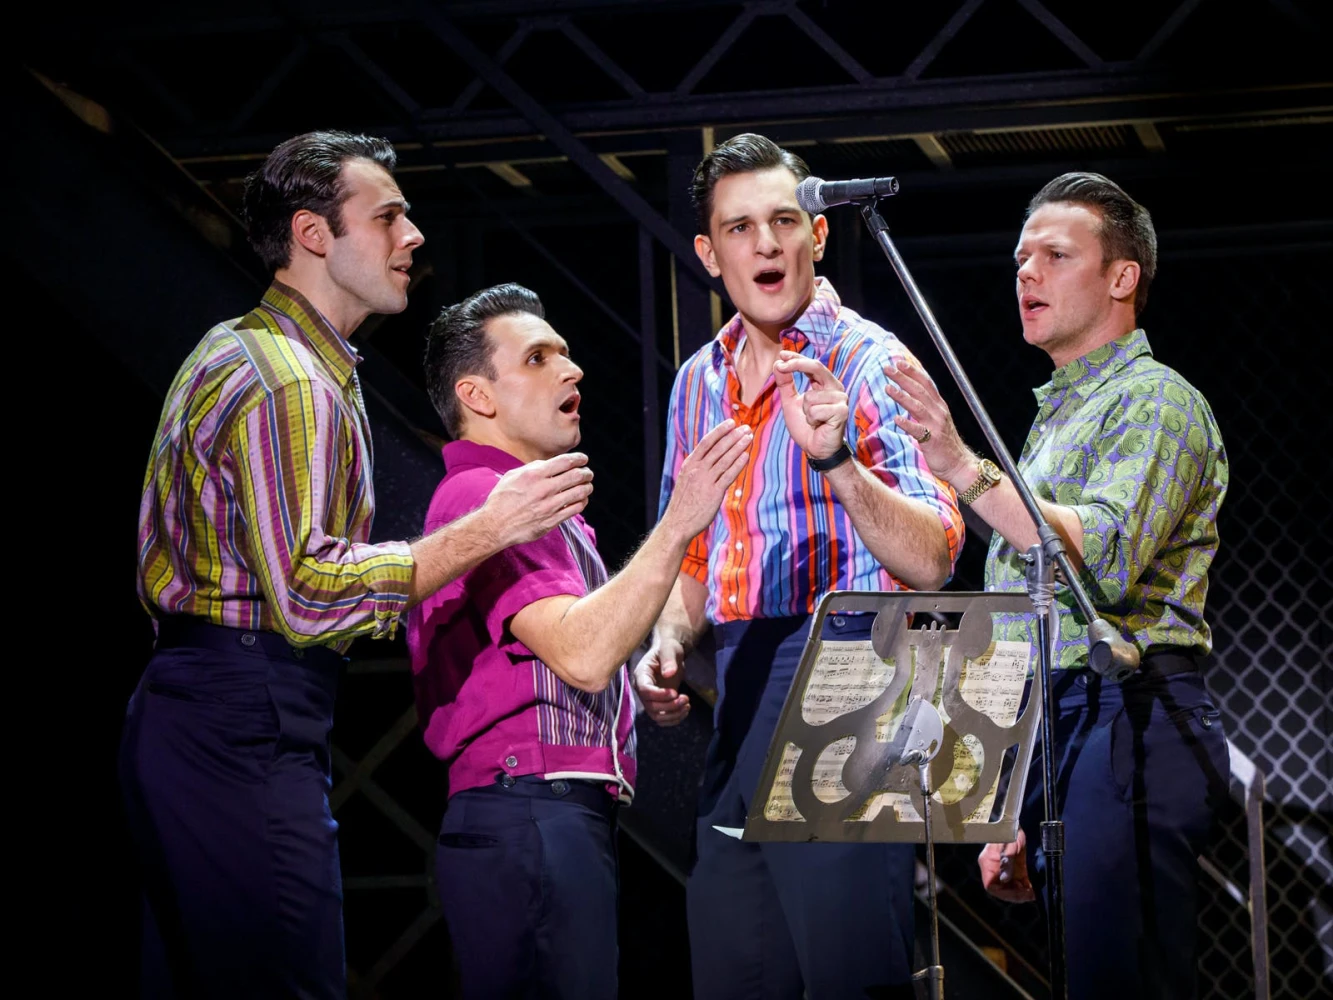 Jersey Boys: What to expect - 5